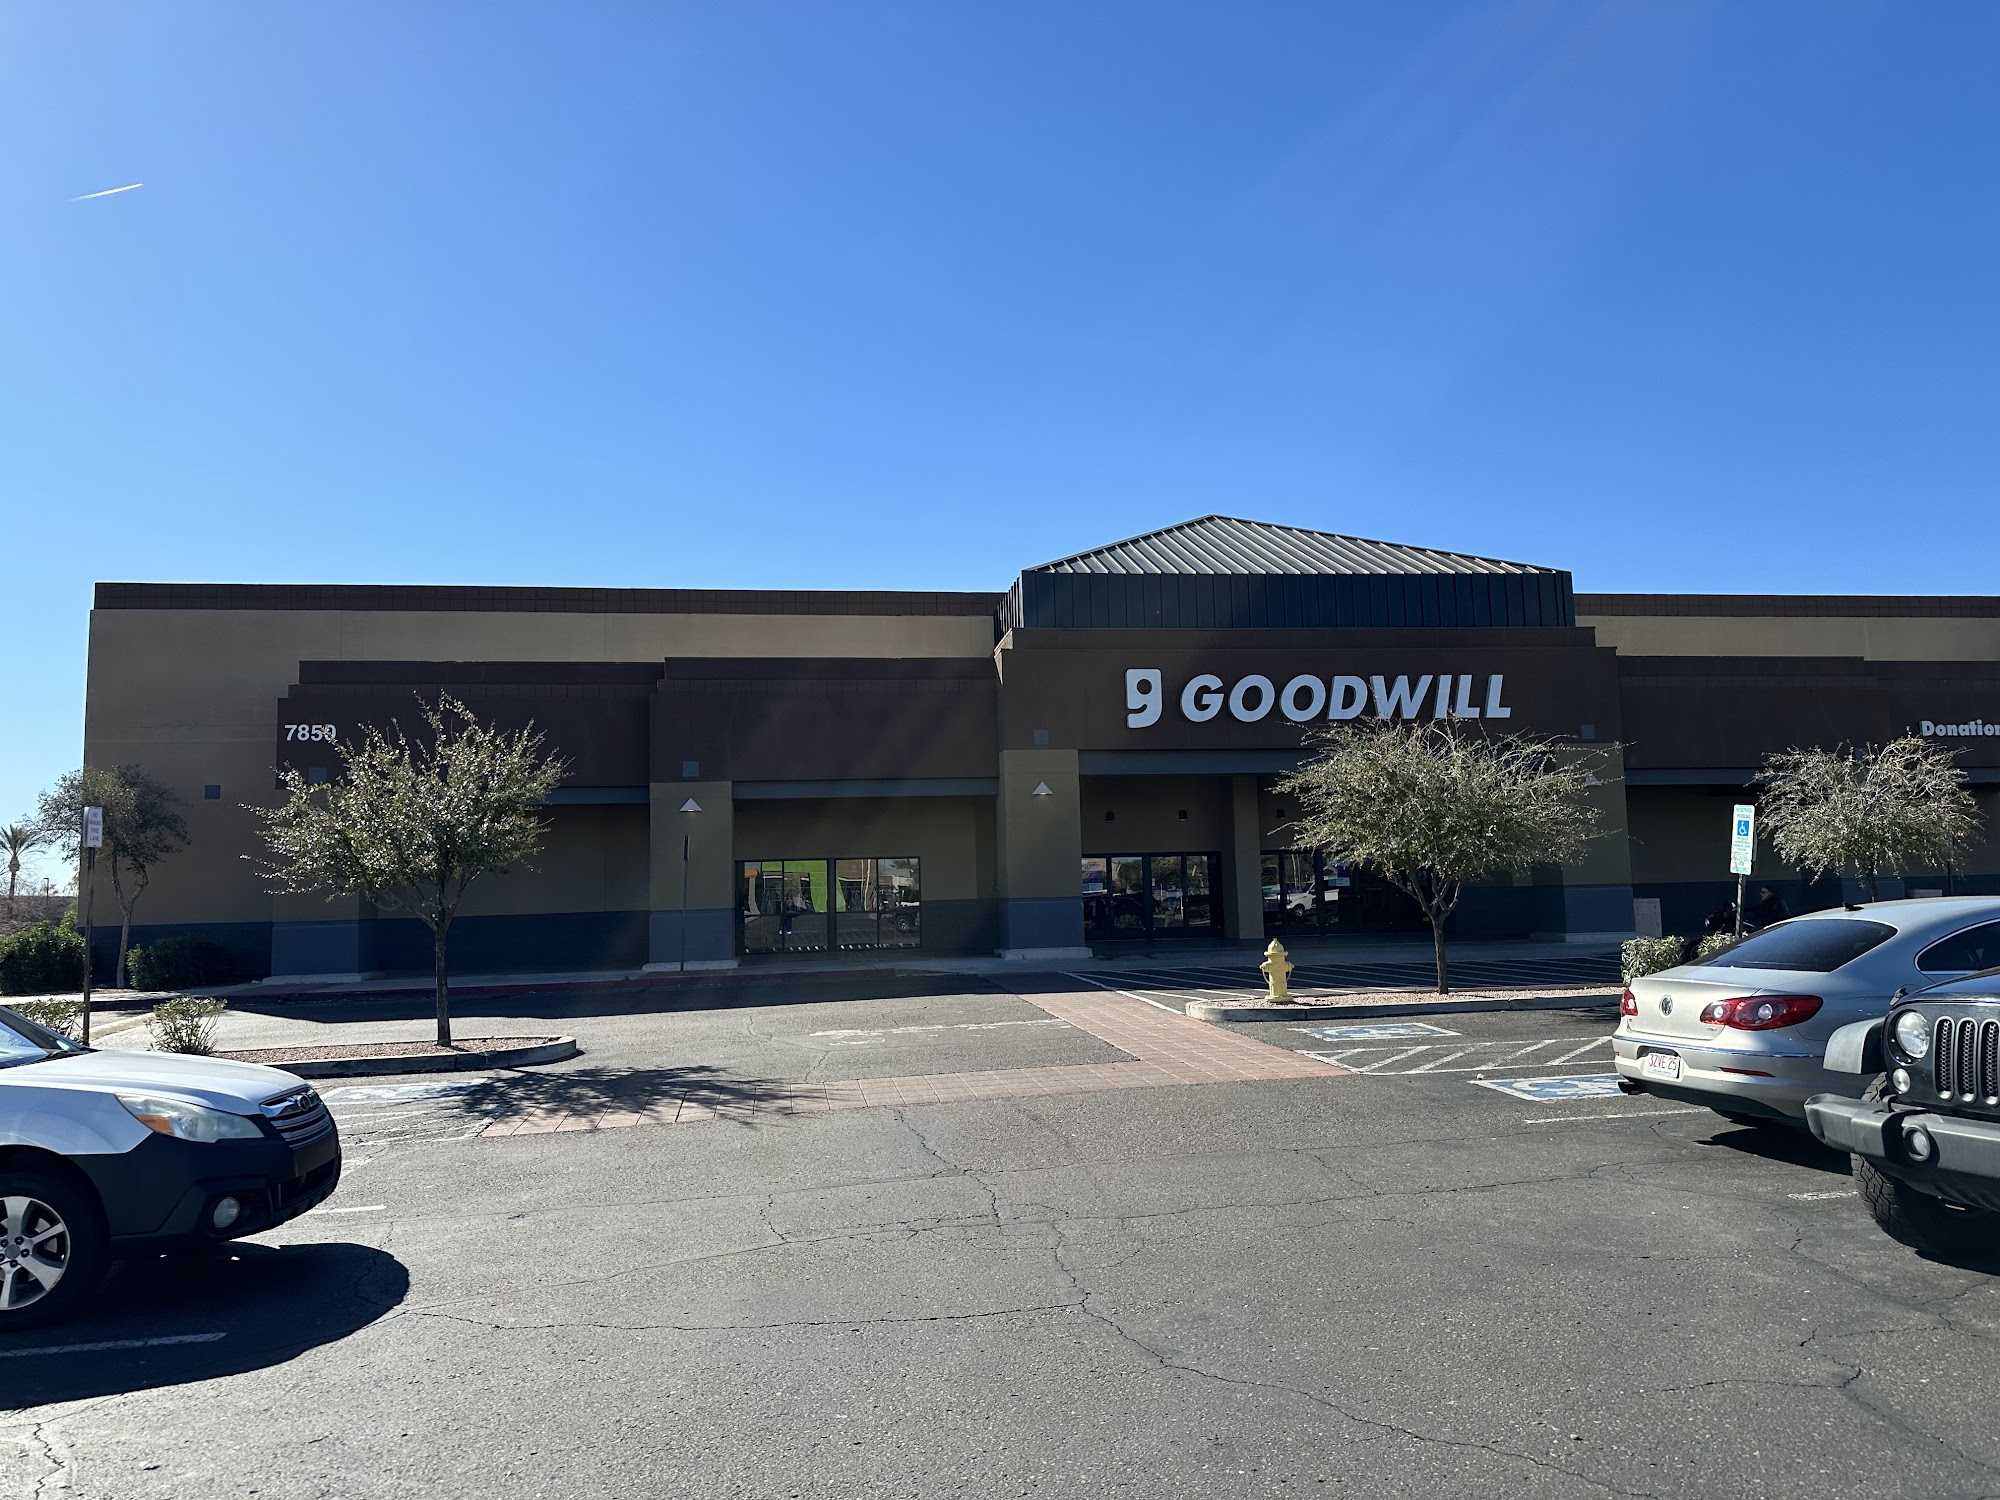 Priest and Elliot - Goodwill - Retail and Donation Center